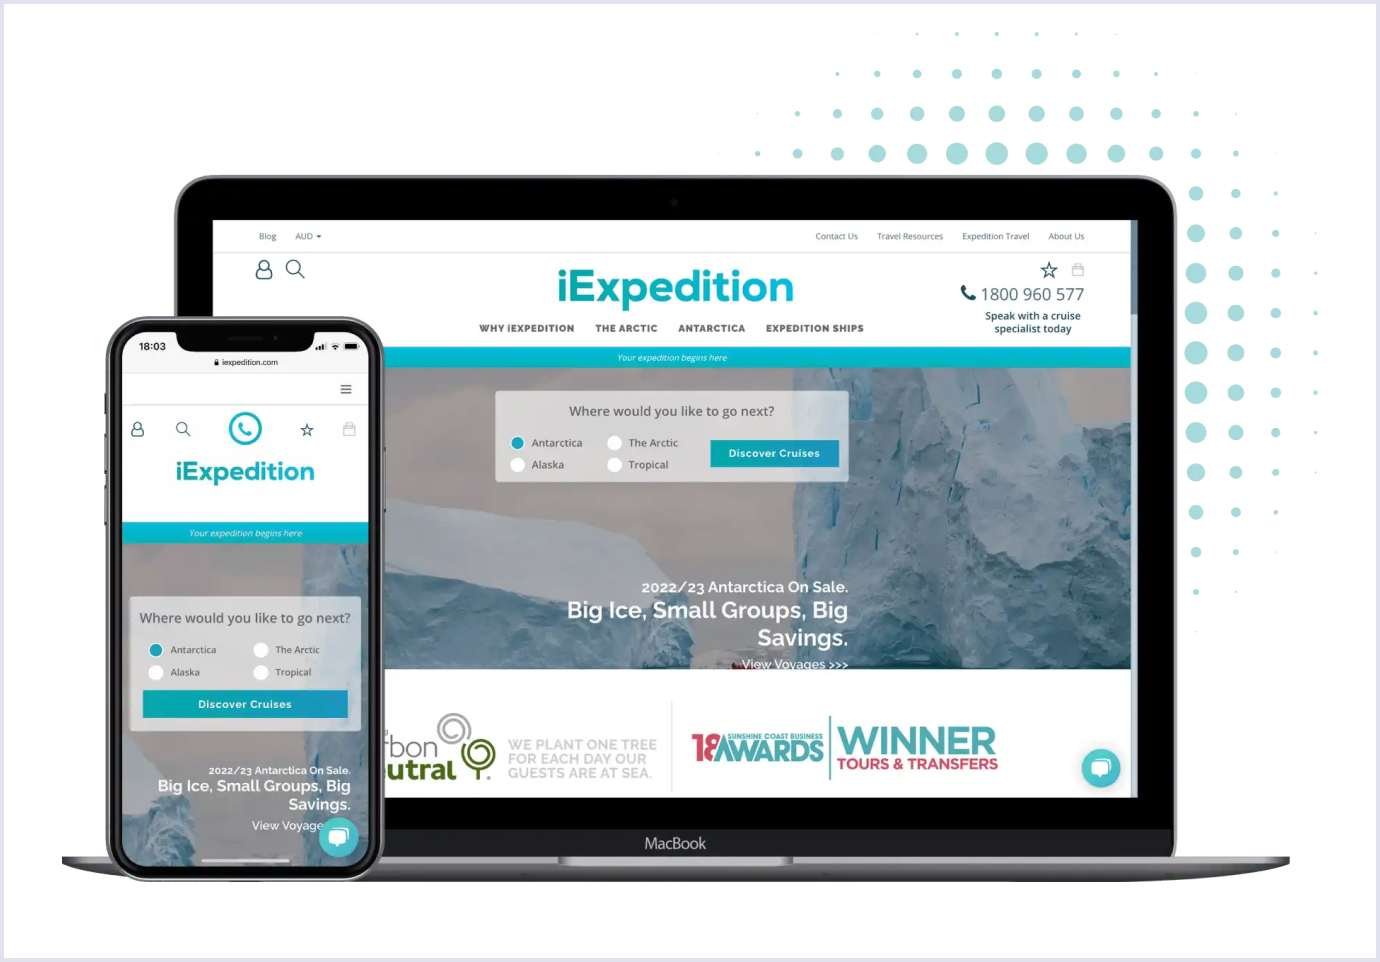 iExpedition global travel marketplace